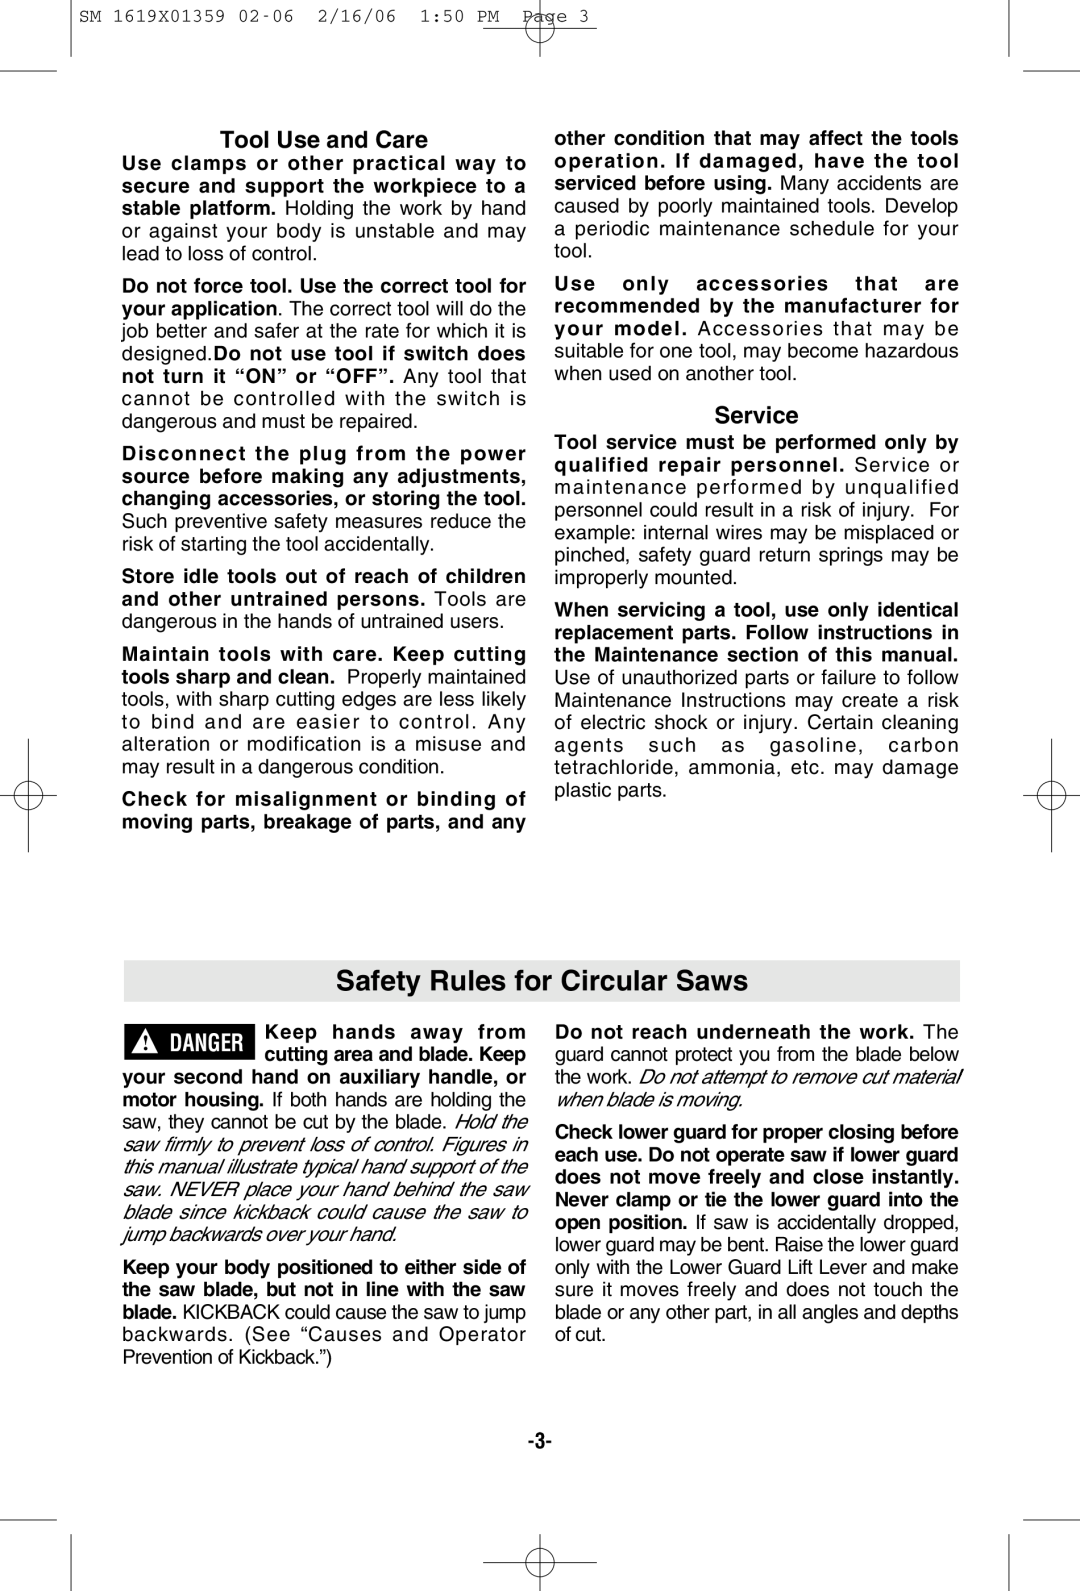 Skil HD5860 manual Safety Rules for Circular Saws, Tool Use and Care, Service 